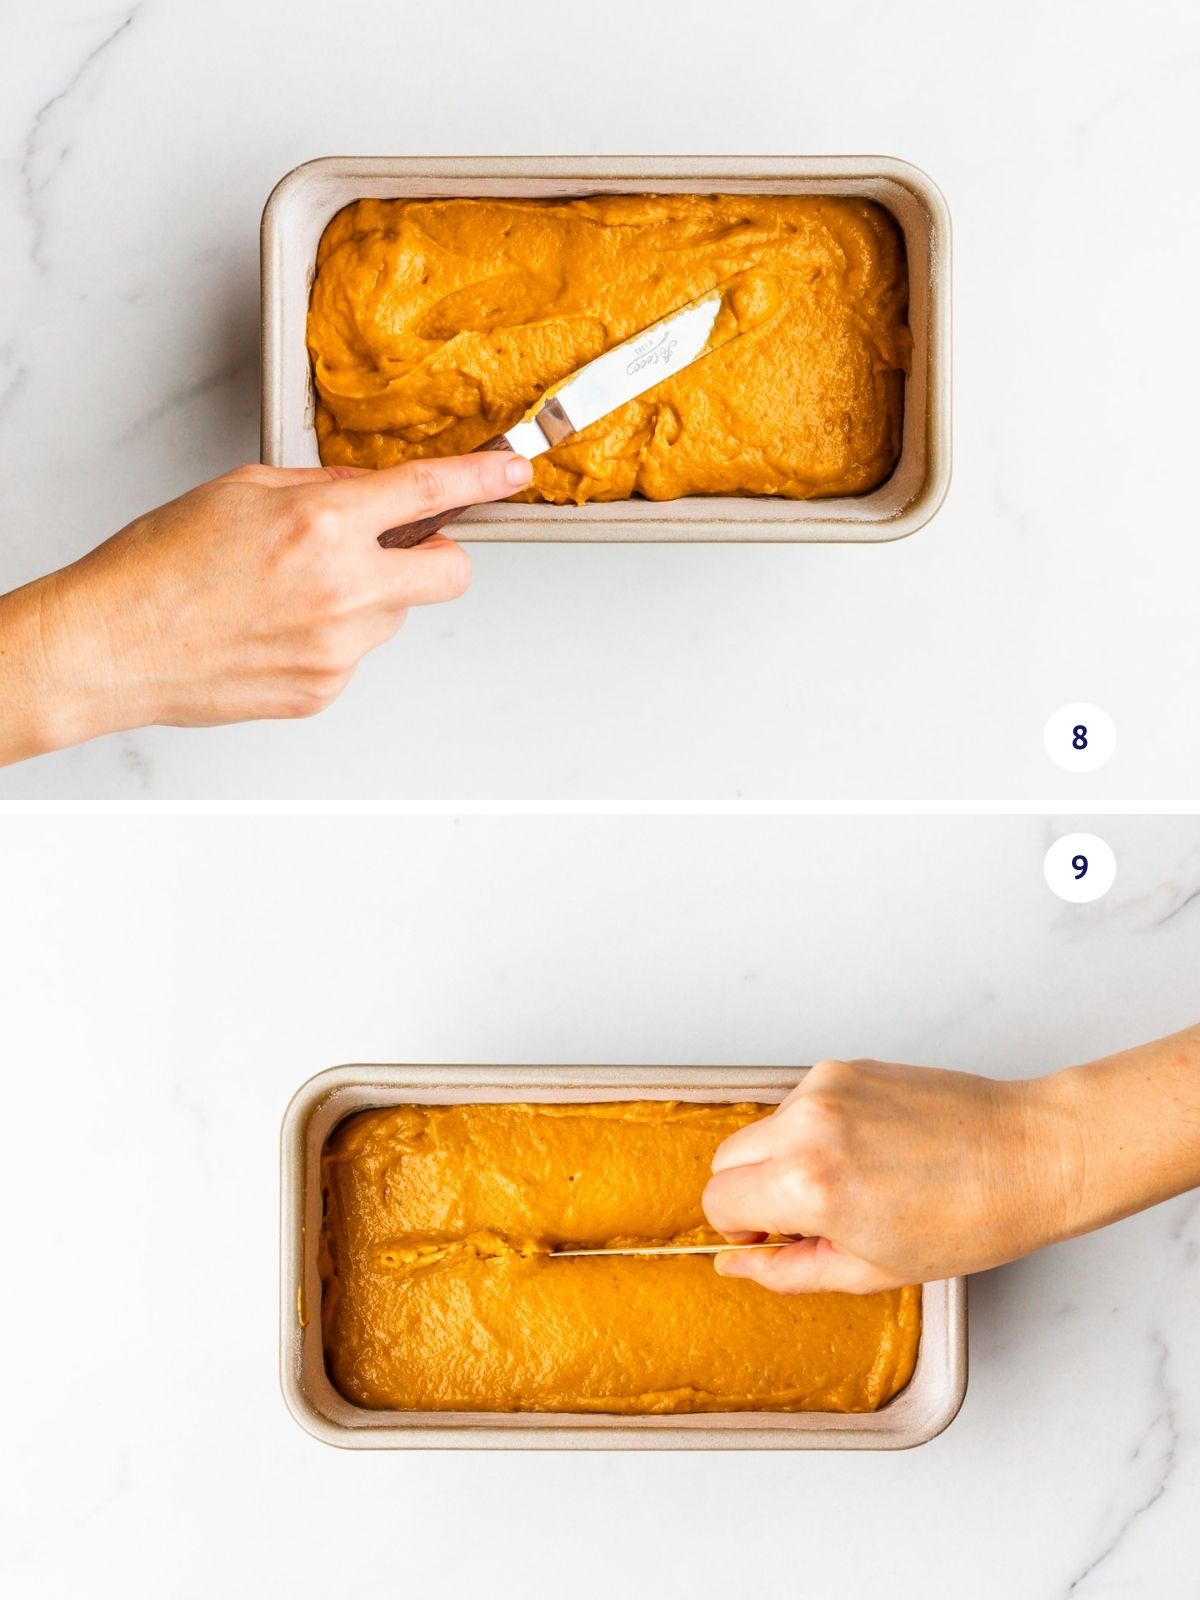 Transferring pumpkin bread batter to a loaf pan, smoothing with an offset spatula, then scoring down the middle to promote a more even crack when it bakes.